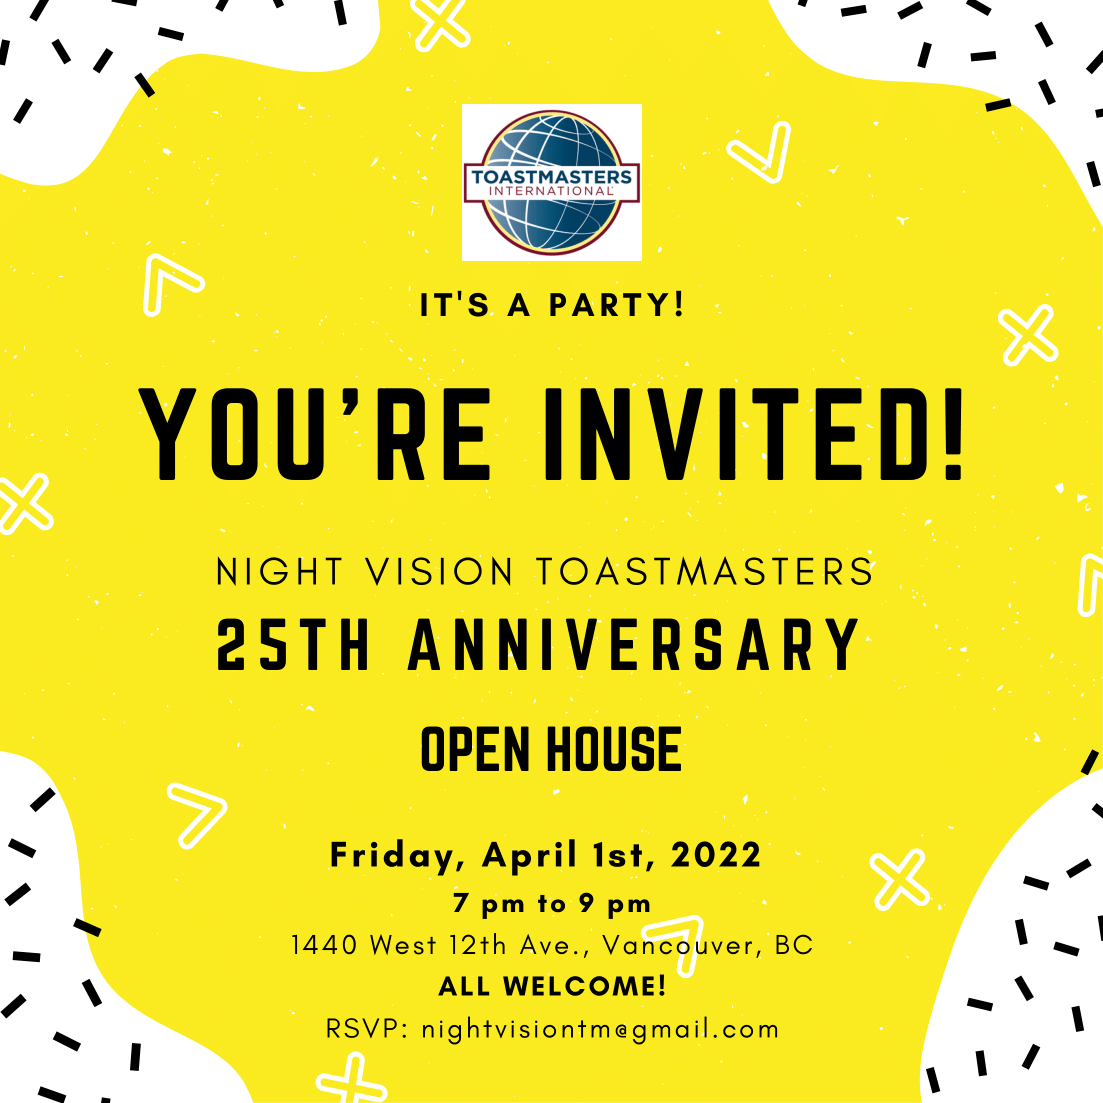 Night Vision Toastmasters Open House - Friday, April 1st